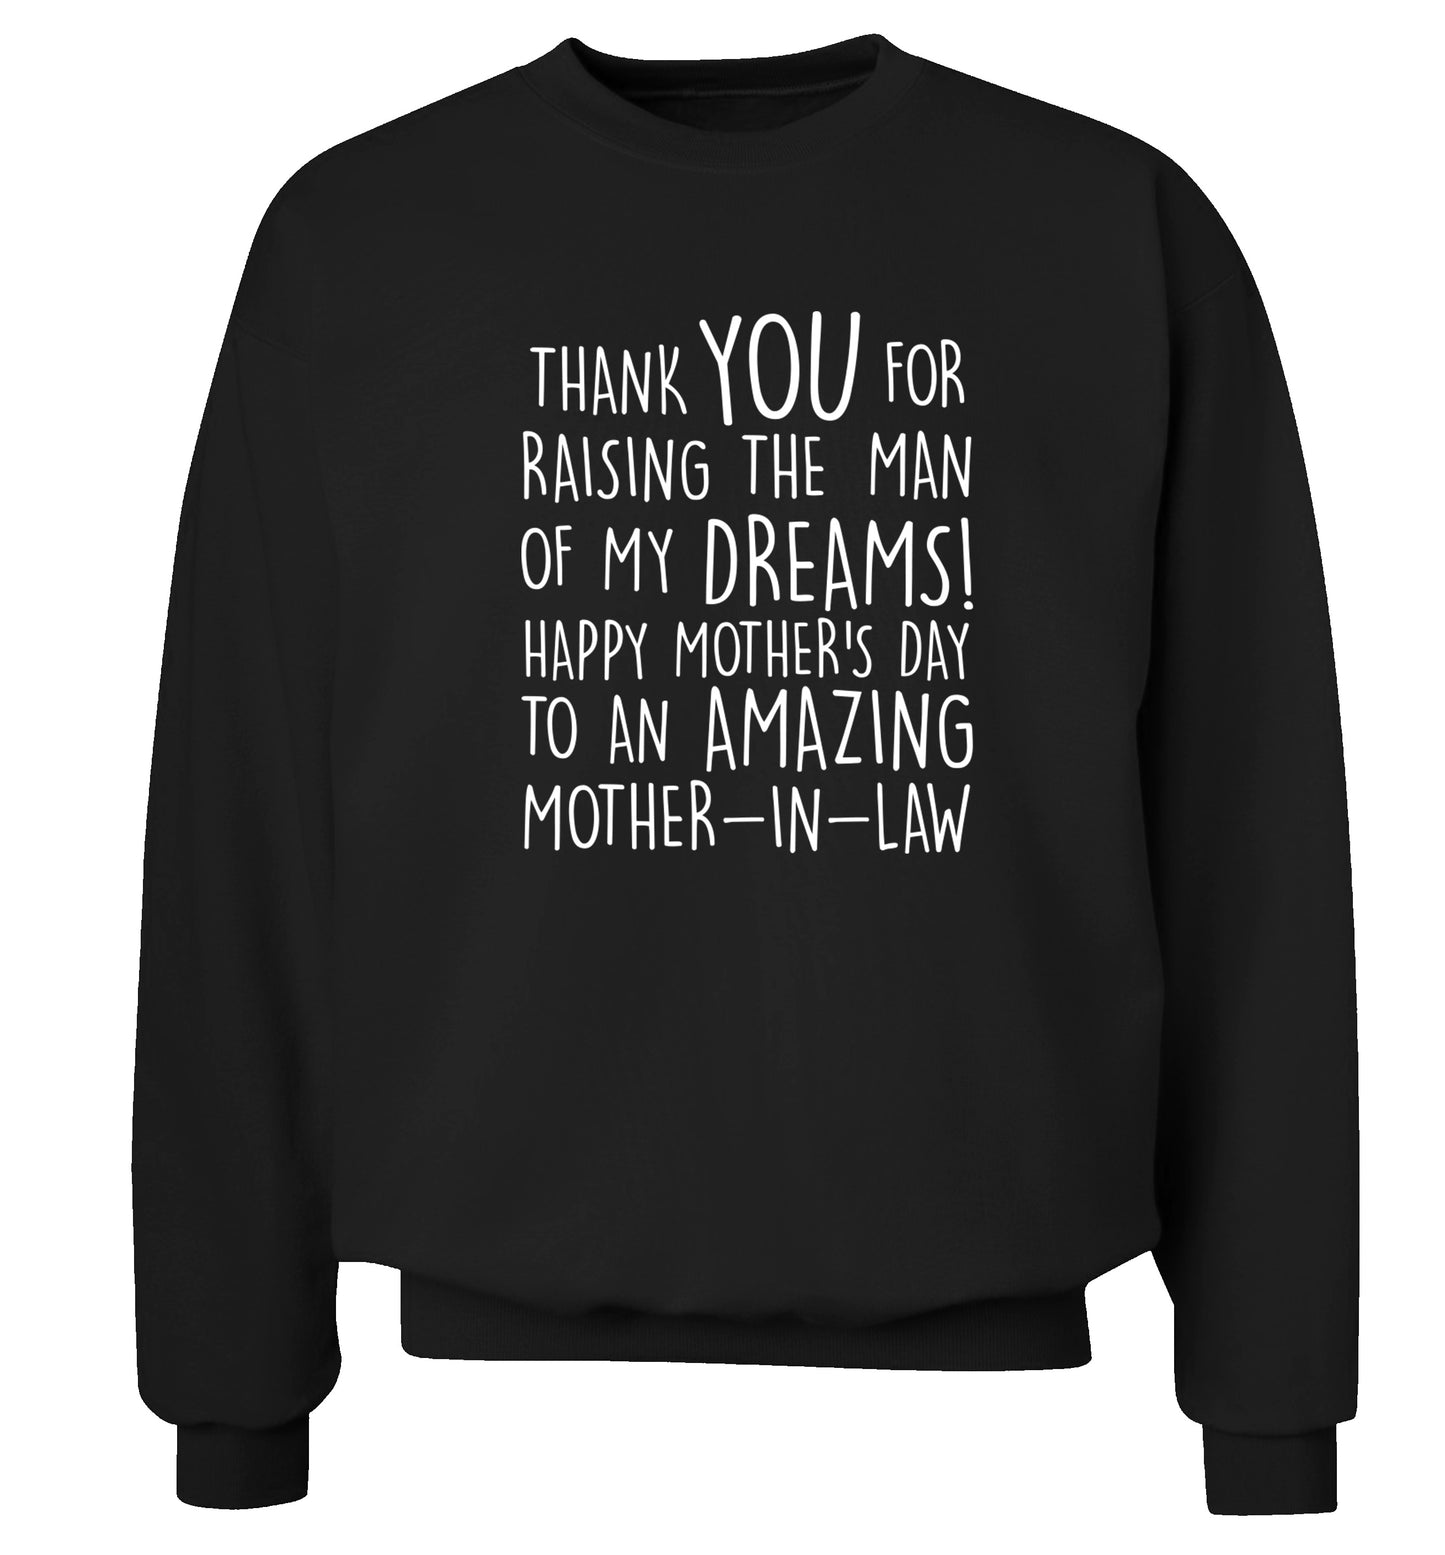 Thank you for raising the man of my dreams happy mother's day mother-in-law Adult's unisex black Sweater 2XL